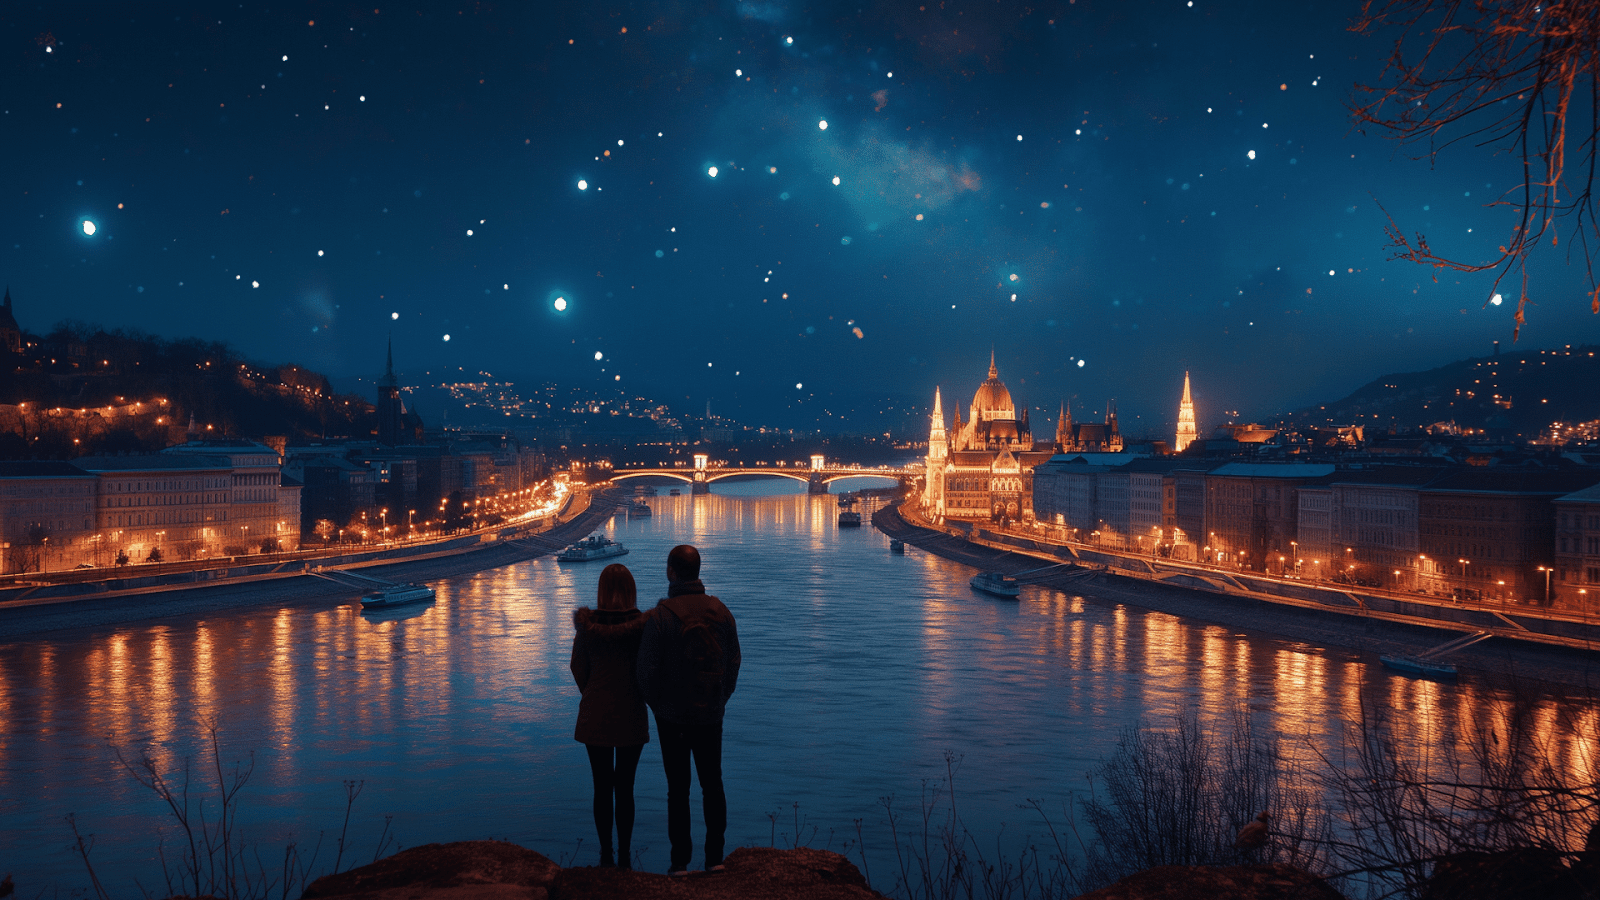 A couple gazes over the Danube, the city lights reflecting like stars in the river